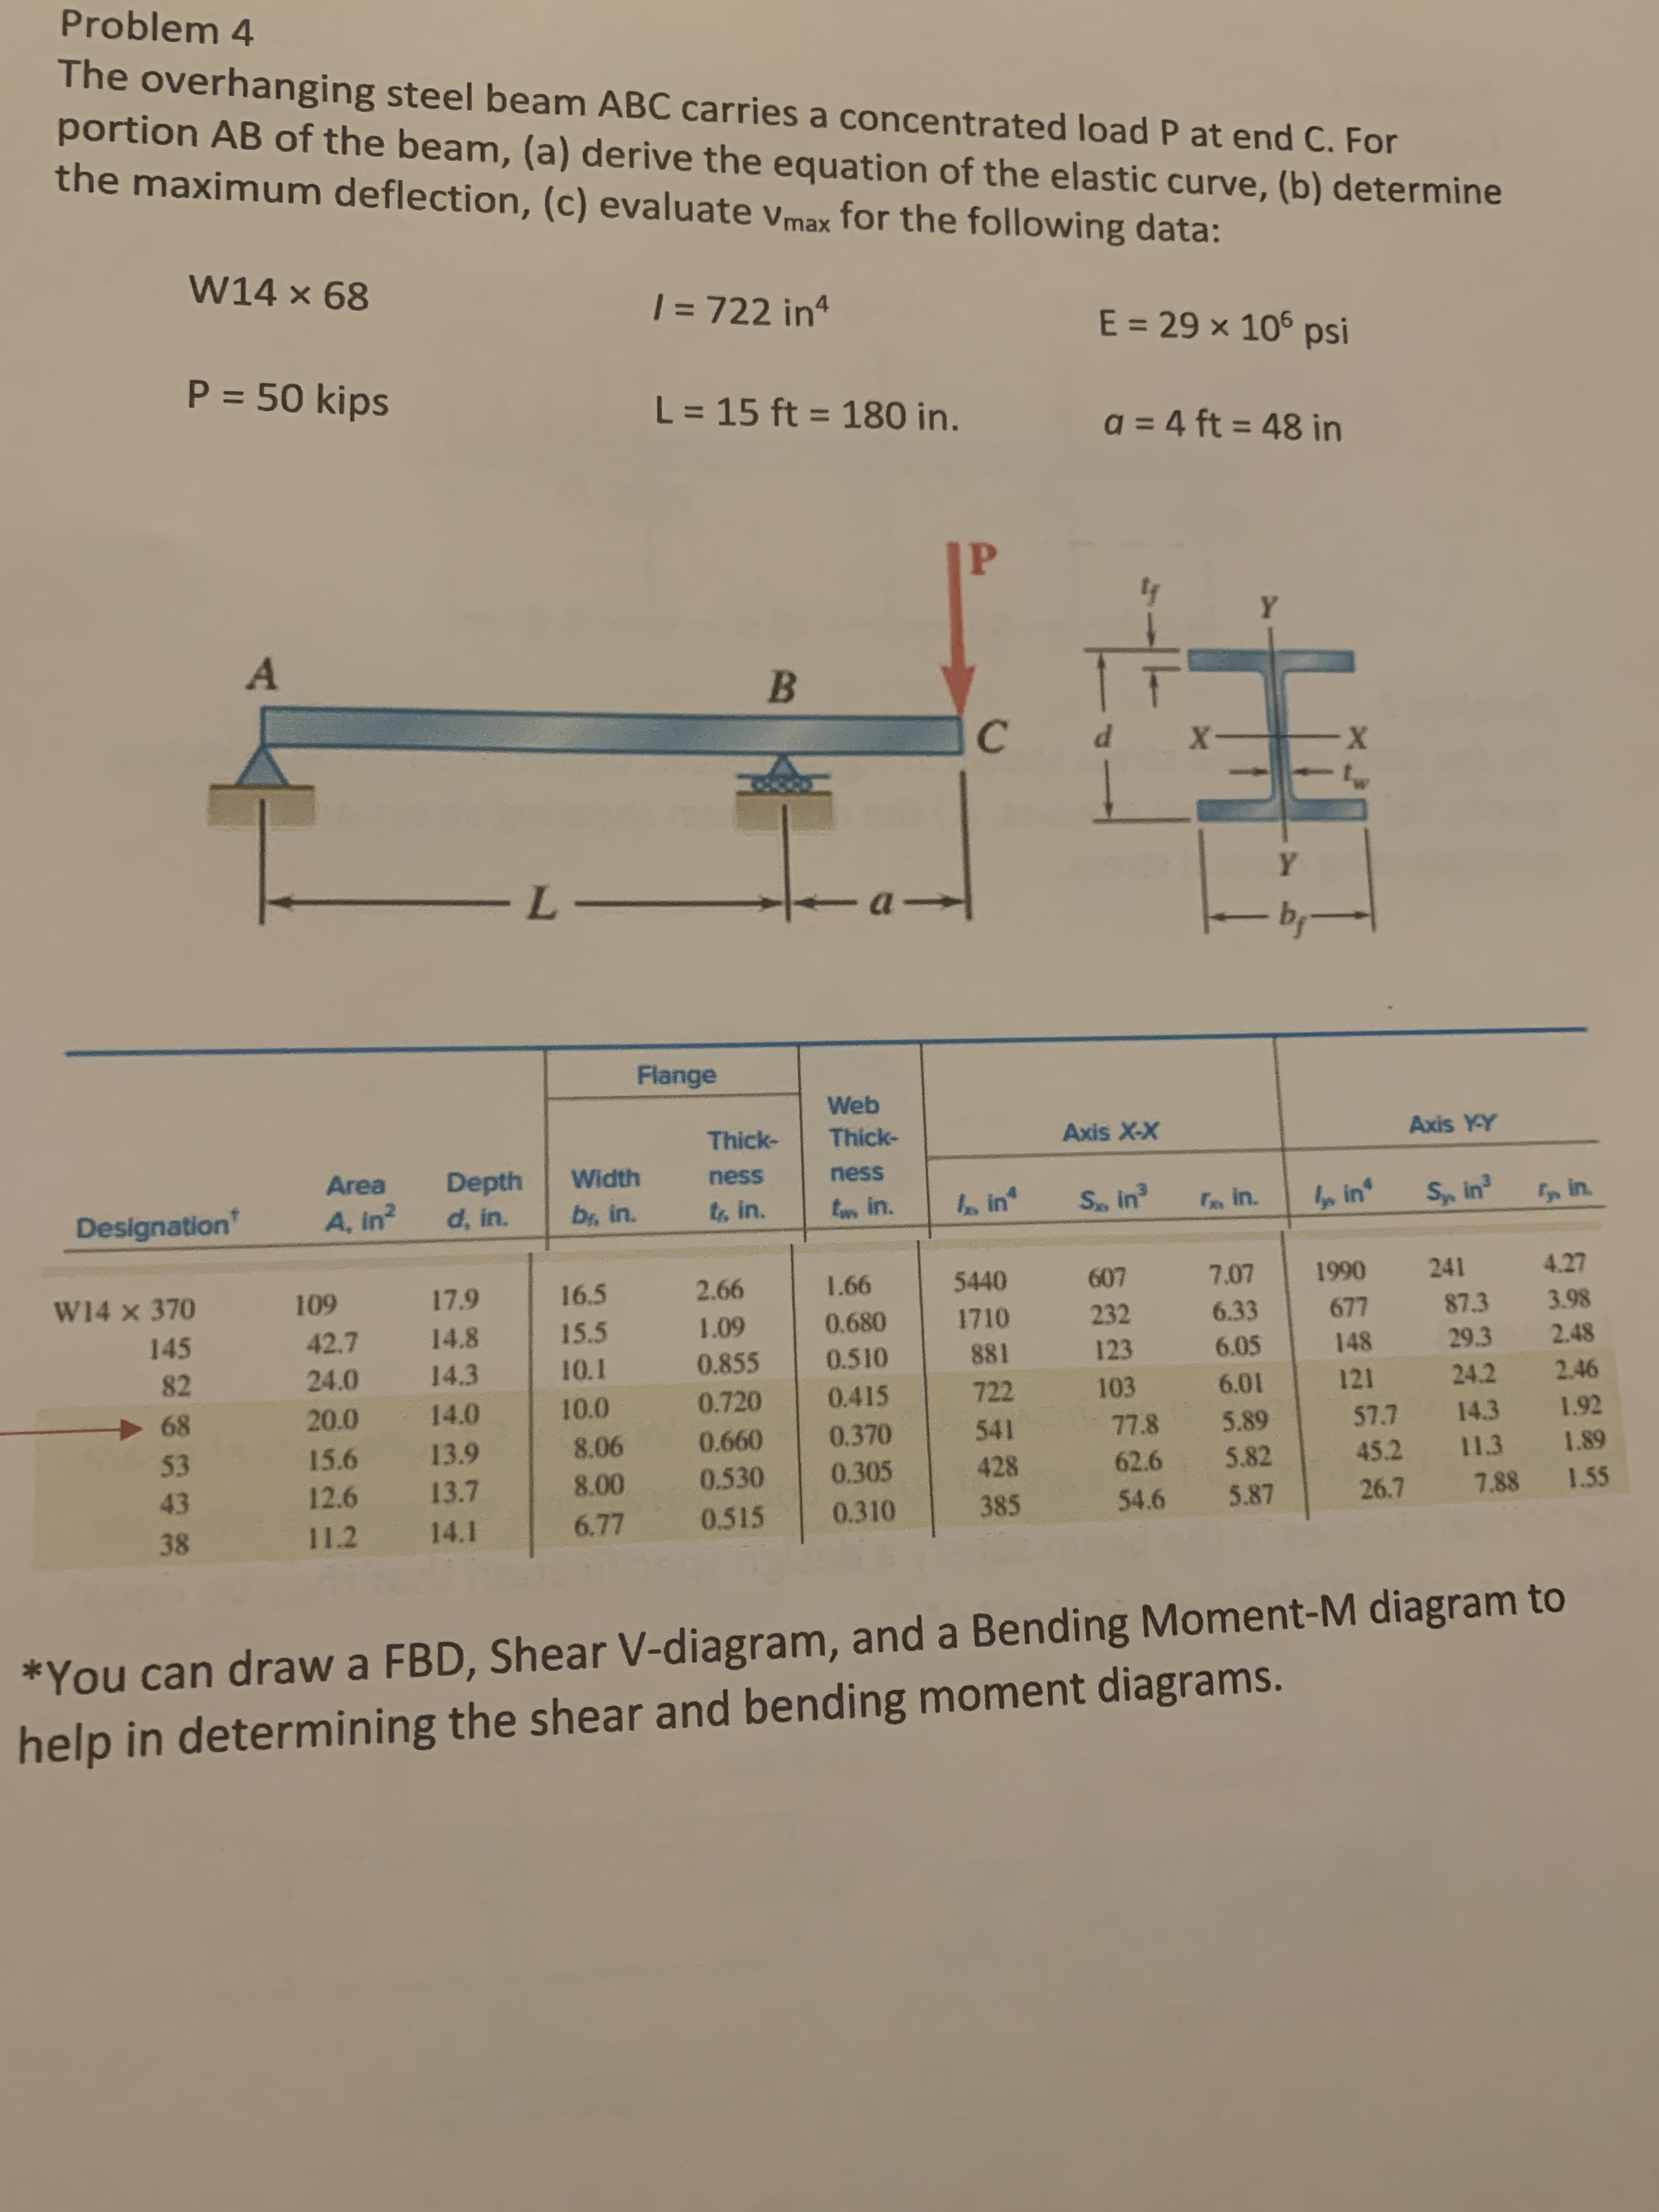 Problem 4
The overhanging steel beam ABC carries a concentrated load P at end C. For
portion AB of the beam, (a) derive the equation of the elastic curve, (b) determine
the maximum deflection, (c) evaluate vmax for the following data:
W14 × 68
| = 722 in4
E = 29 x 106 psi
P = 50 kips
L = 15 ft = 180 in.
%3D
a = 4 ft = 48 in
%3D
х-
-by-
Flange
Web
Thick-
Thick-
Axis X-X
Axis Y-Y
Depth
d, in.
Area
Width
ness
ness
Designation'
A, in?
br, in.
to, in.
L in.
in
S, in
F in.
in'
S, in
in.
W14 x 370
109
17.9
16.5
2.66
1.66
5440
607
7.07
1990
241
4.27
145
42.7
14.8
15.5
1.09
0.680
1710
232
6.33
677
87.3
3.98
82
24.0
14.3
10.1
0.855
0.510
881
123
6.05
148
29.3
2.48
68
20.0
14.0
10.0
0.720
0.415
722
103
6.01
121
24.2
2.46
53
15.6
13.9
8.06
0.660
0.370
541
77.8
5.89
57.7
14.3
1.92
43
12.6
13.7
8.00
0.530
0.305
428
62.6
5.82
45.2 11.3
1.89
6.77
0.515
0.310
385
54.6
5.87
26.7
7.88
1.55
38
11.2
14.1
*You can draw a FBD, Shear V-diagram, and a Bending Moment-M diagram to
help in determining the shear and bending moment diagrams.
